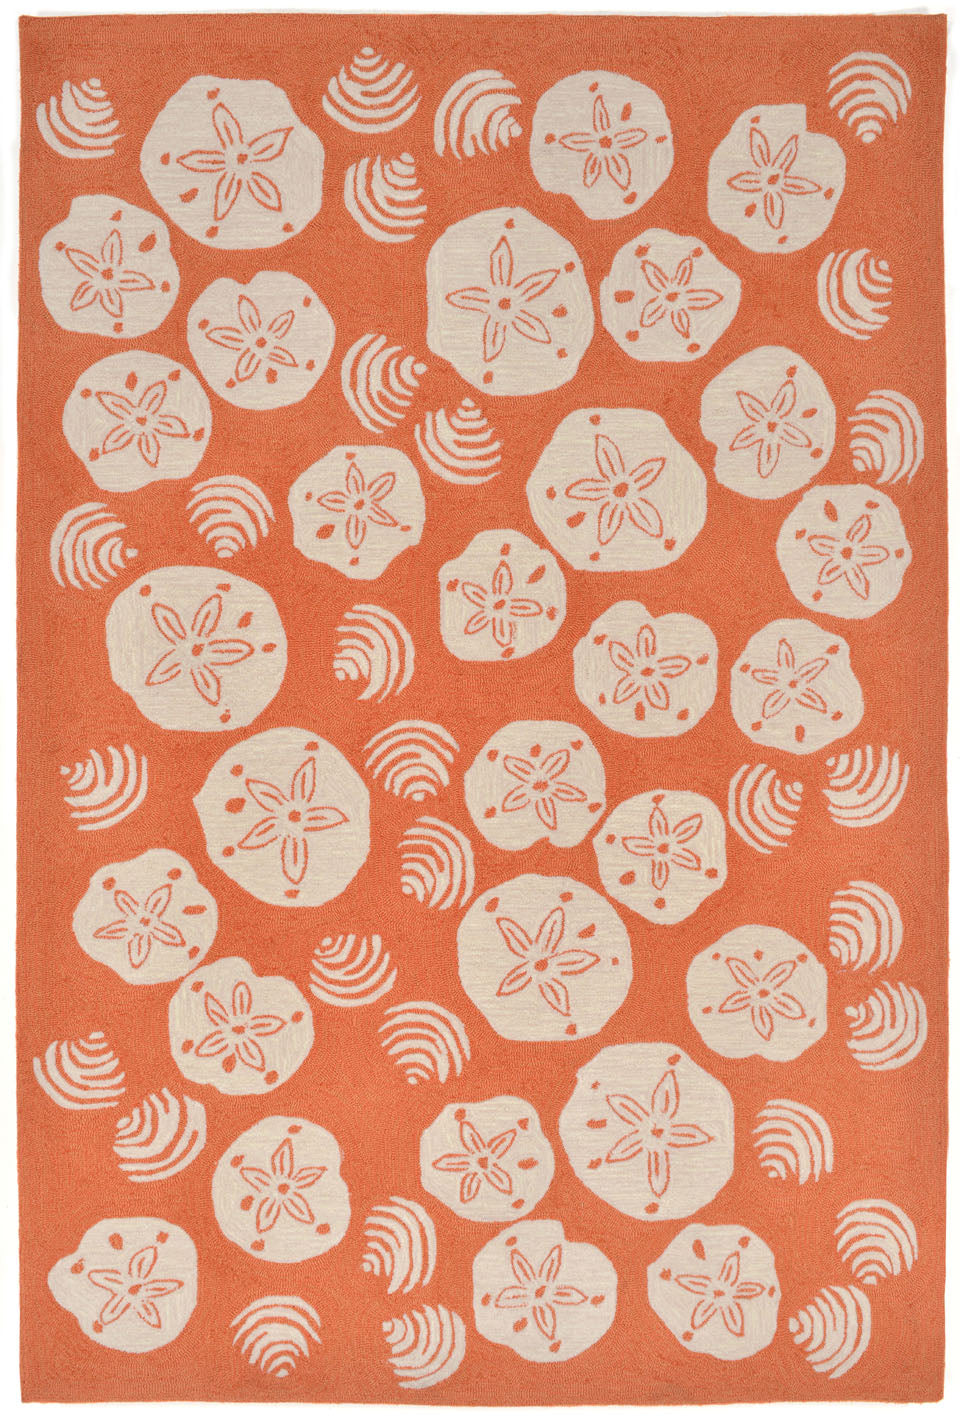 Trans Ocean Frontporch Shell Toss Orange Area Rug by Liora Manne main image